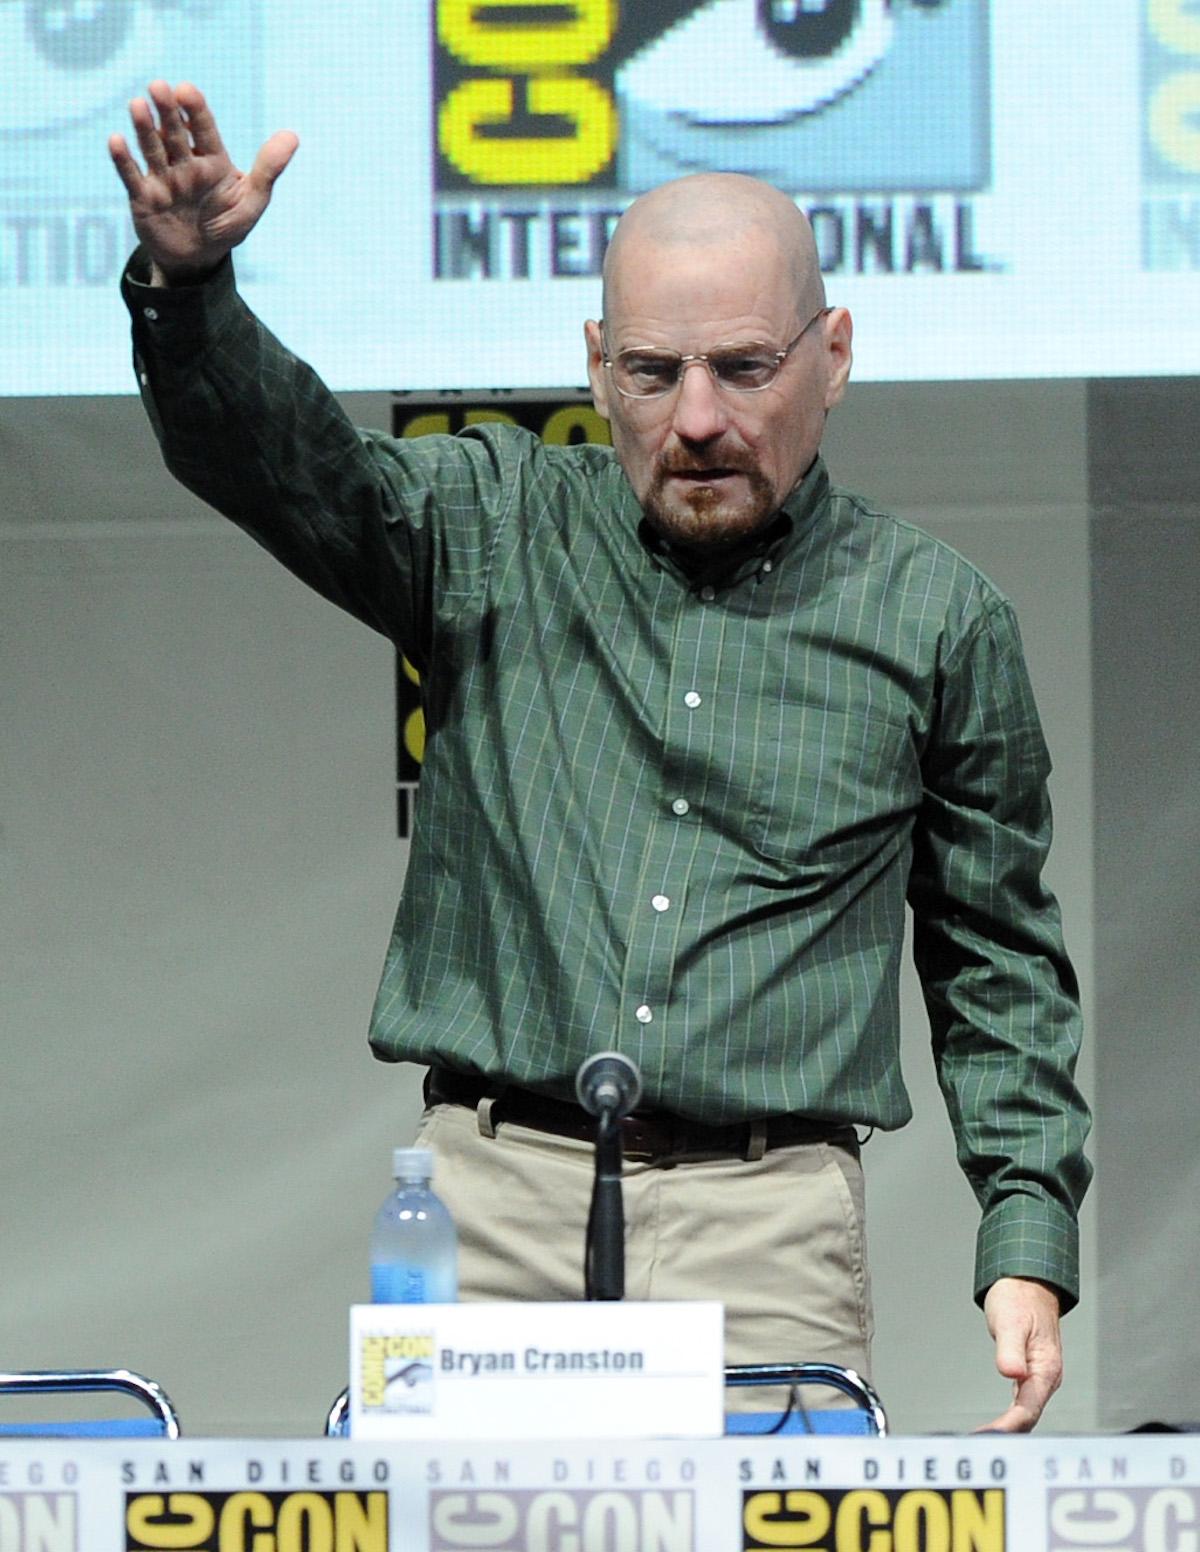 Actor Bryan Cranston wears a Walter White mask onstage at the "Breaking Bad" panel during Comic-Con International 2013 at San Diego Convention Center in San Diego, California on July 21, 2013. (Kevin Winter/Getty Images)